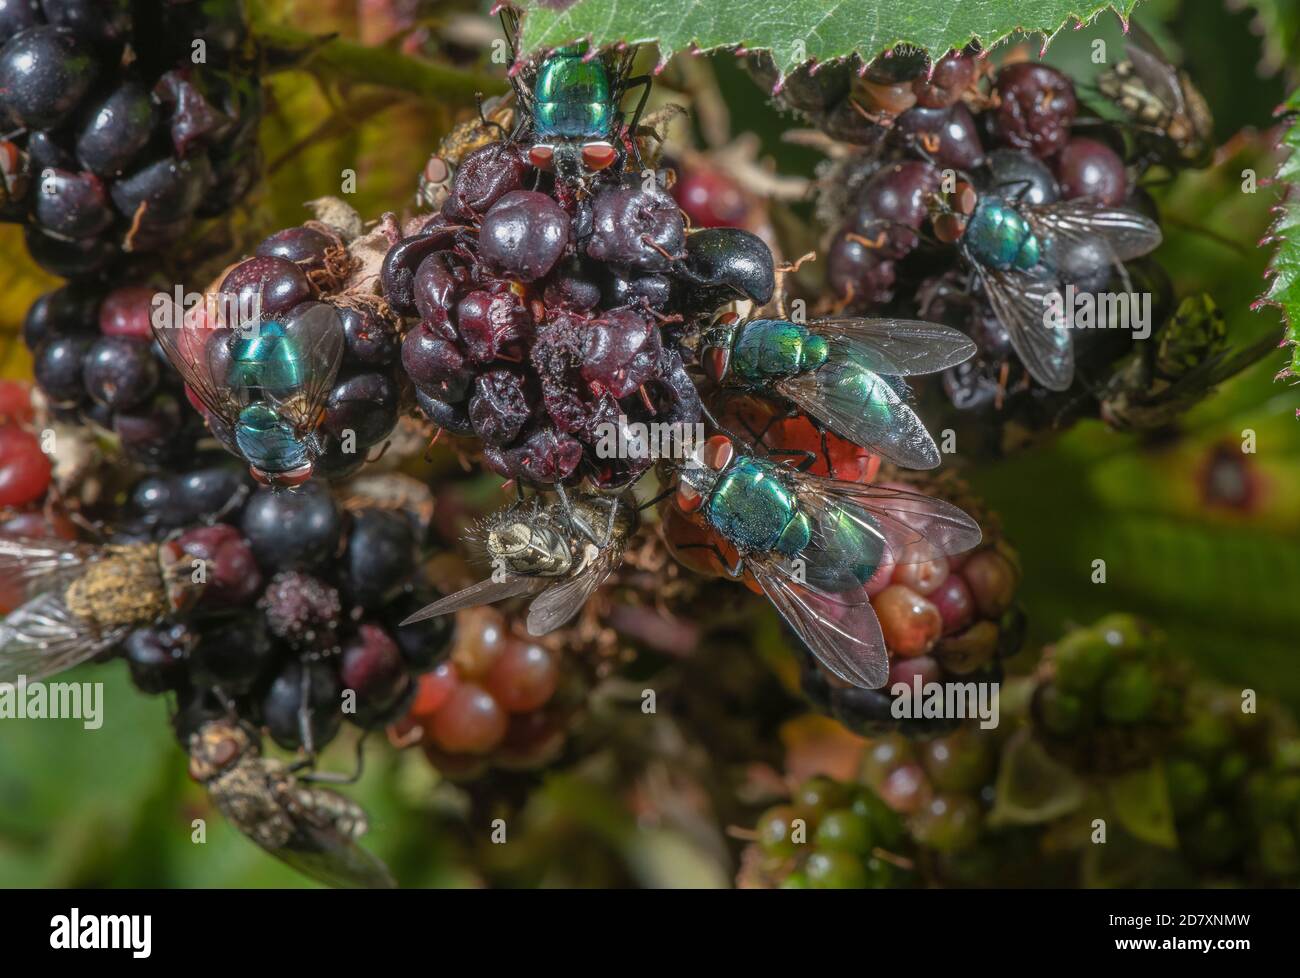 Ripe blackberries, covered with various flies particularly greenbottles and Cluster flies. Late summer hedgerow. Stock Photo